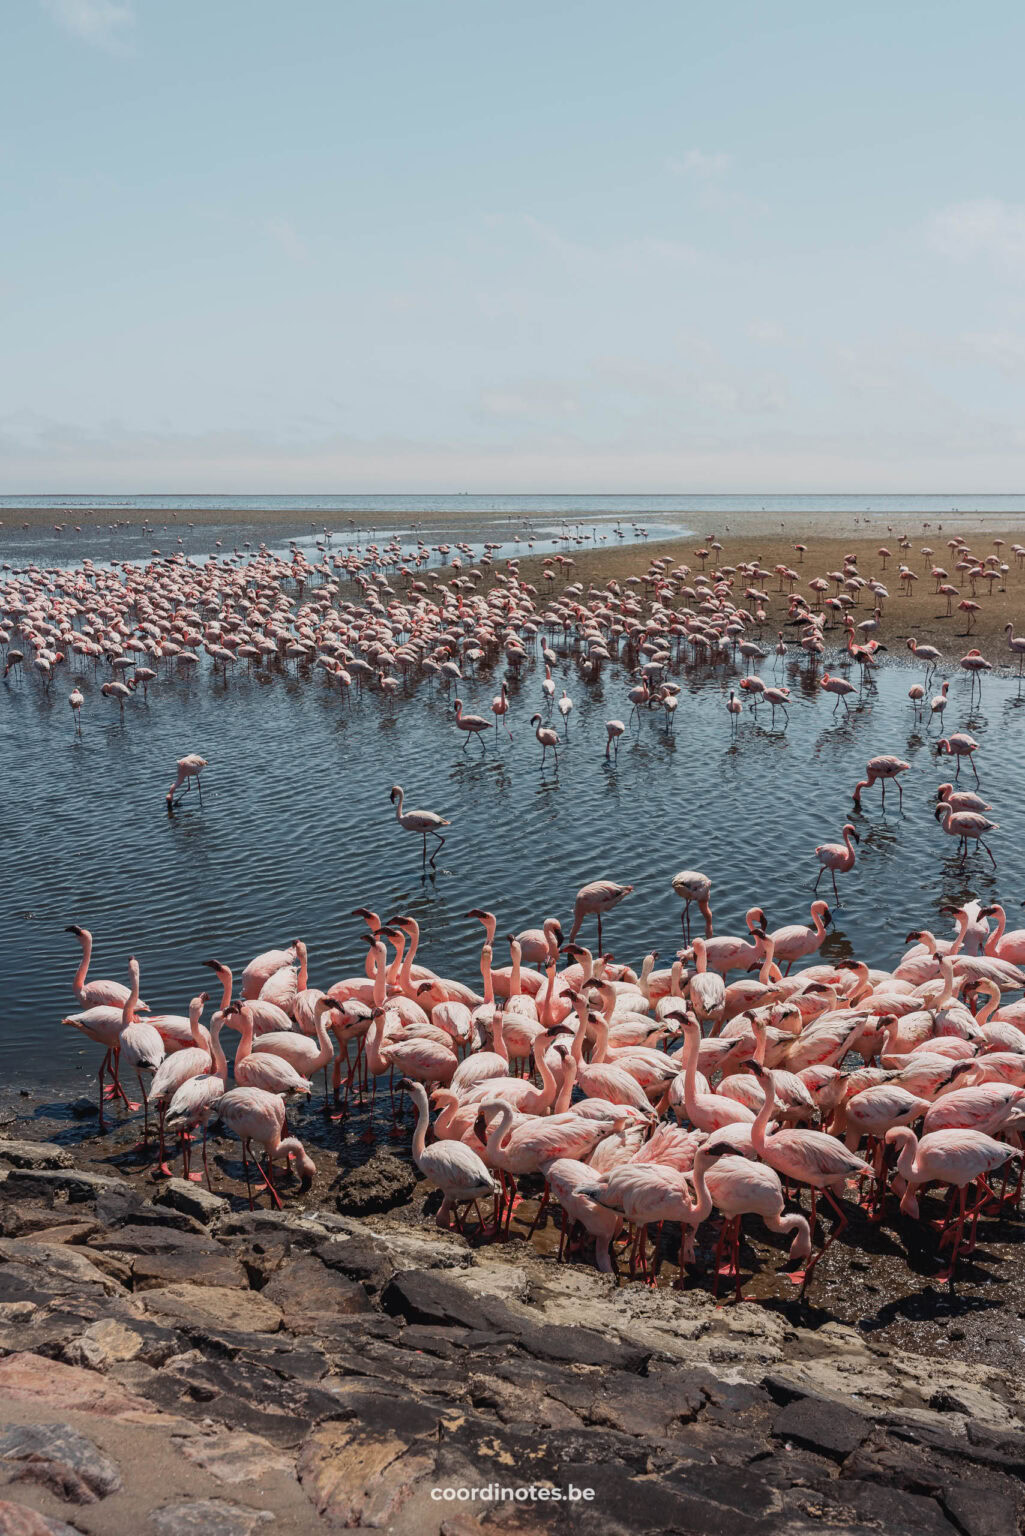 Pink Flamingos, there are thousands of them.